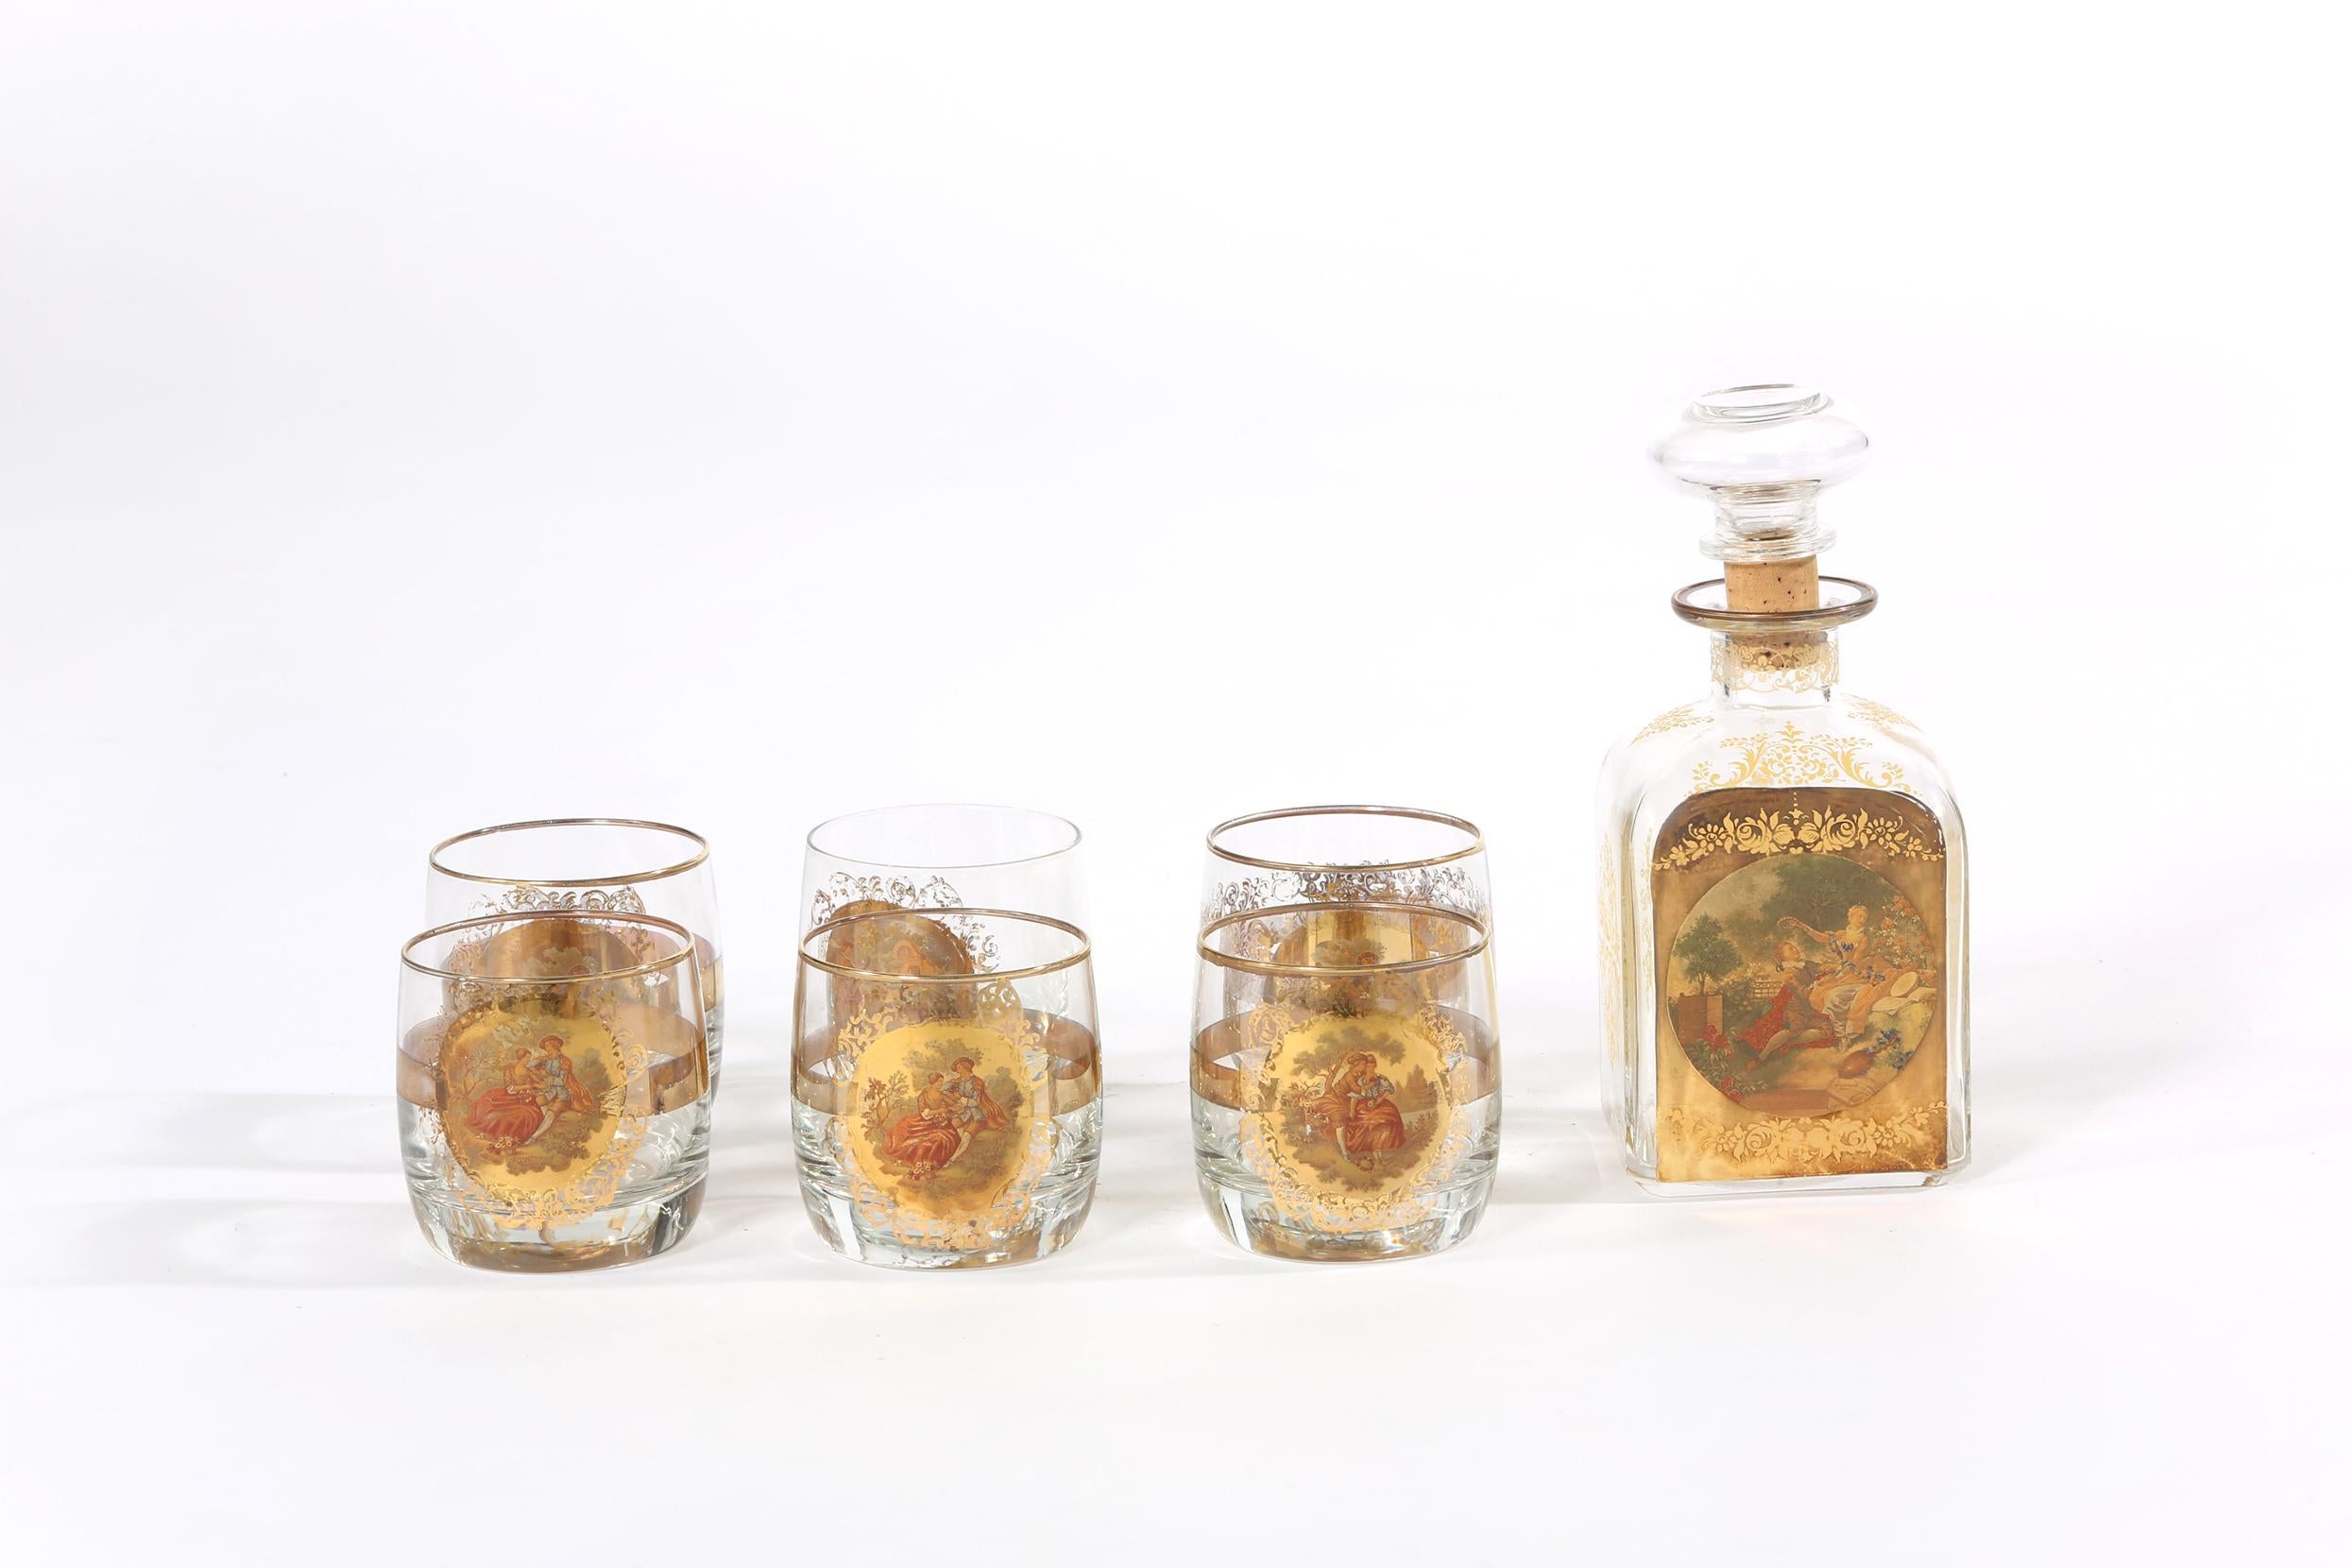 Gilt Mid-20th Century Barware Service for Six People